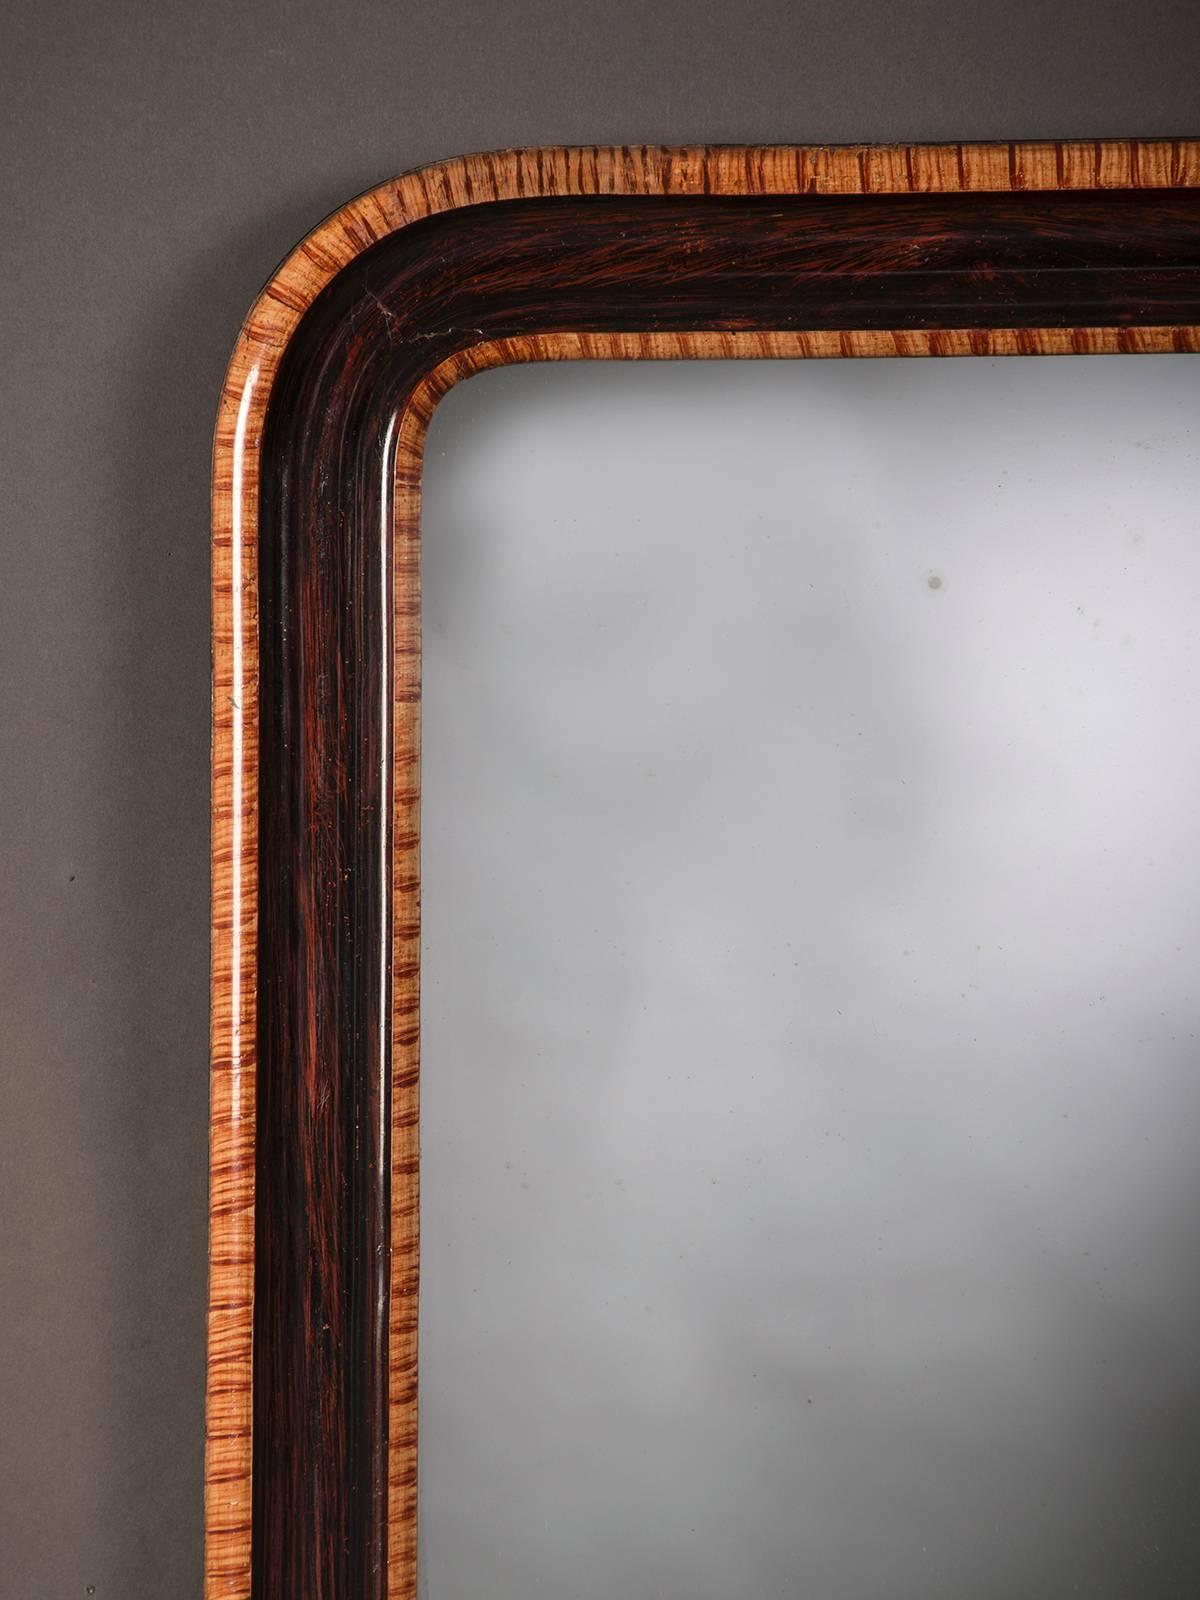 Receive our new selections direct from 1stdibs by email each week. Please click Follow Dealer below and see them first!

A chic and handsome antique French Louis Philippe mirror painted in a faux tortoise and rosewood pattern circa 1880